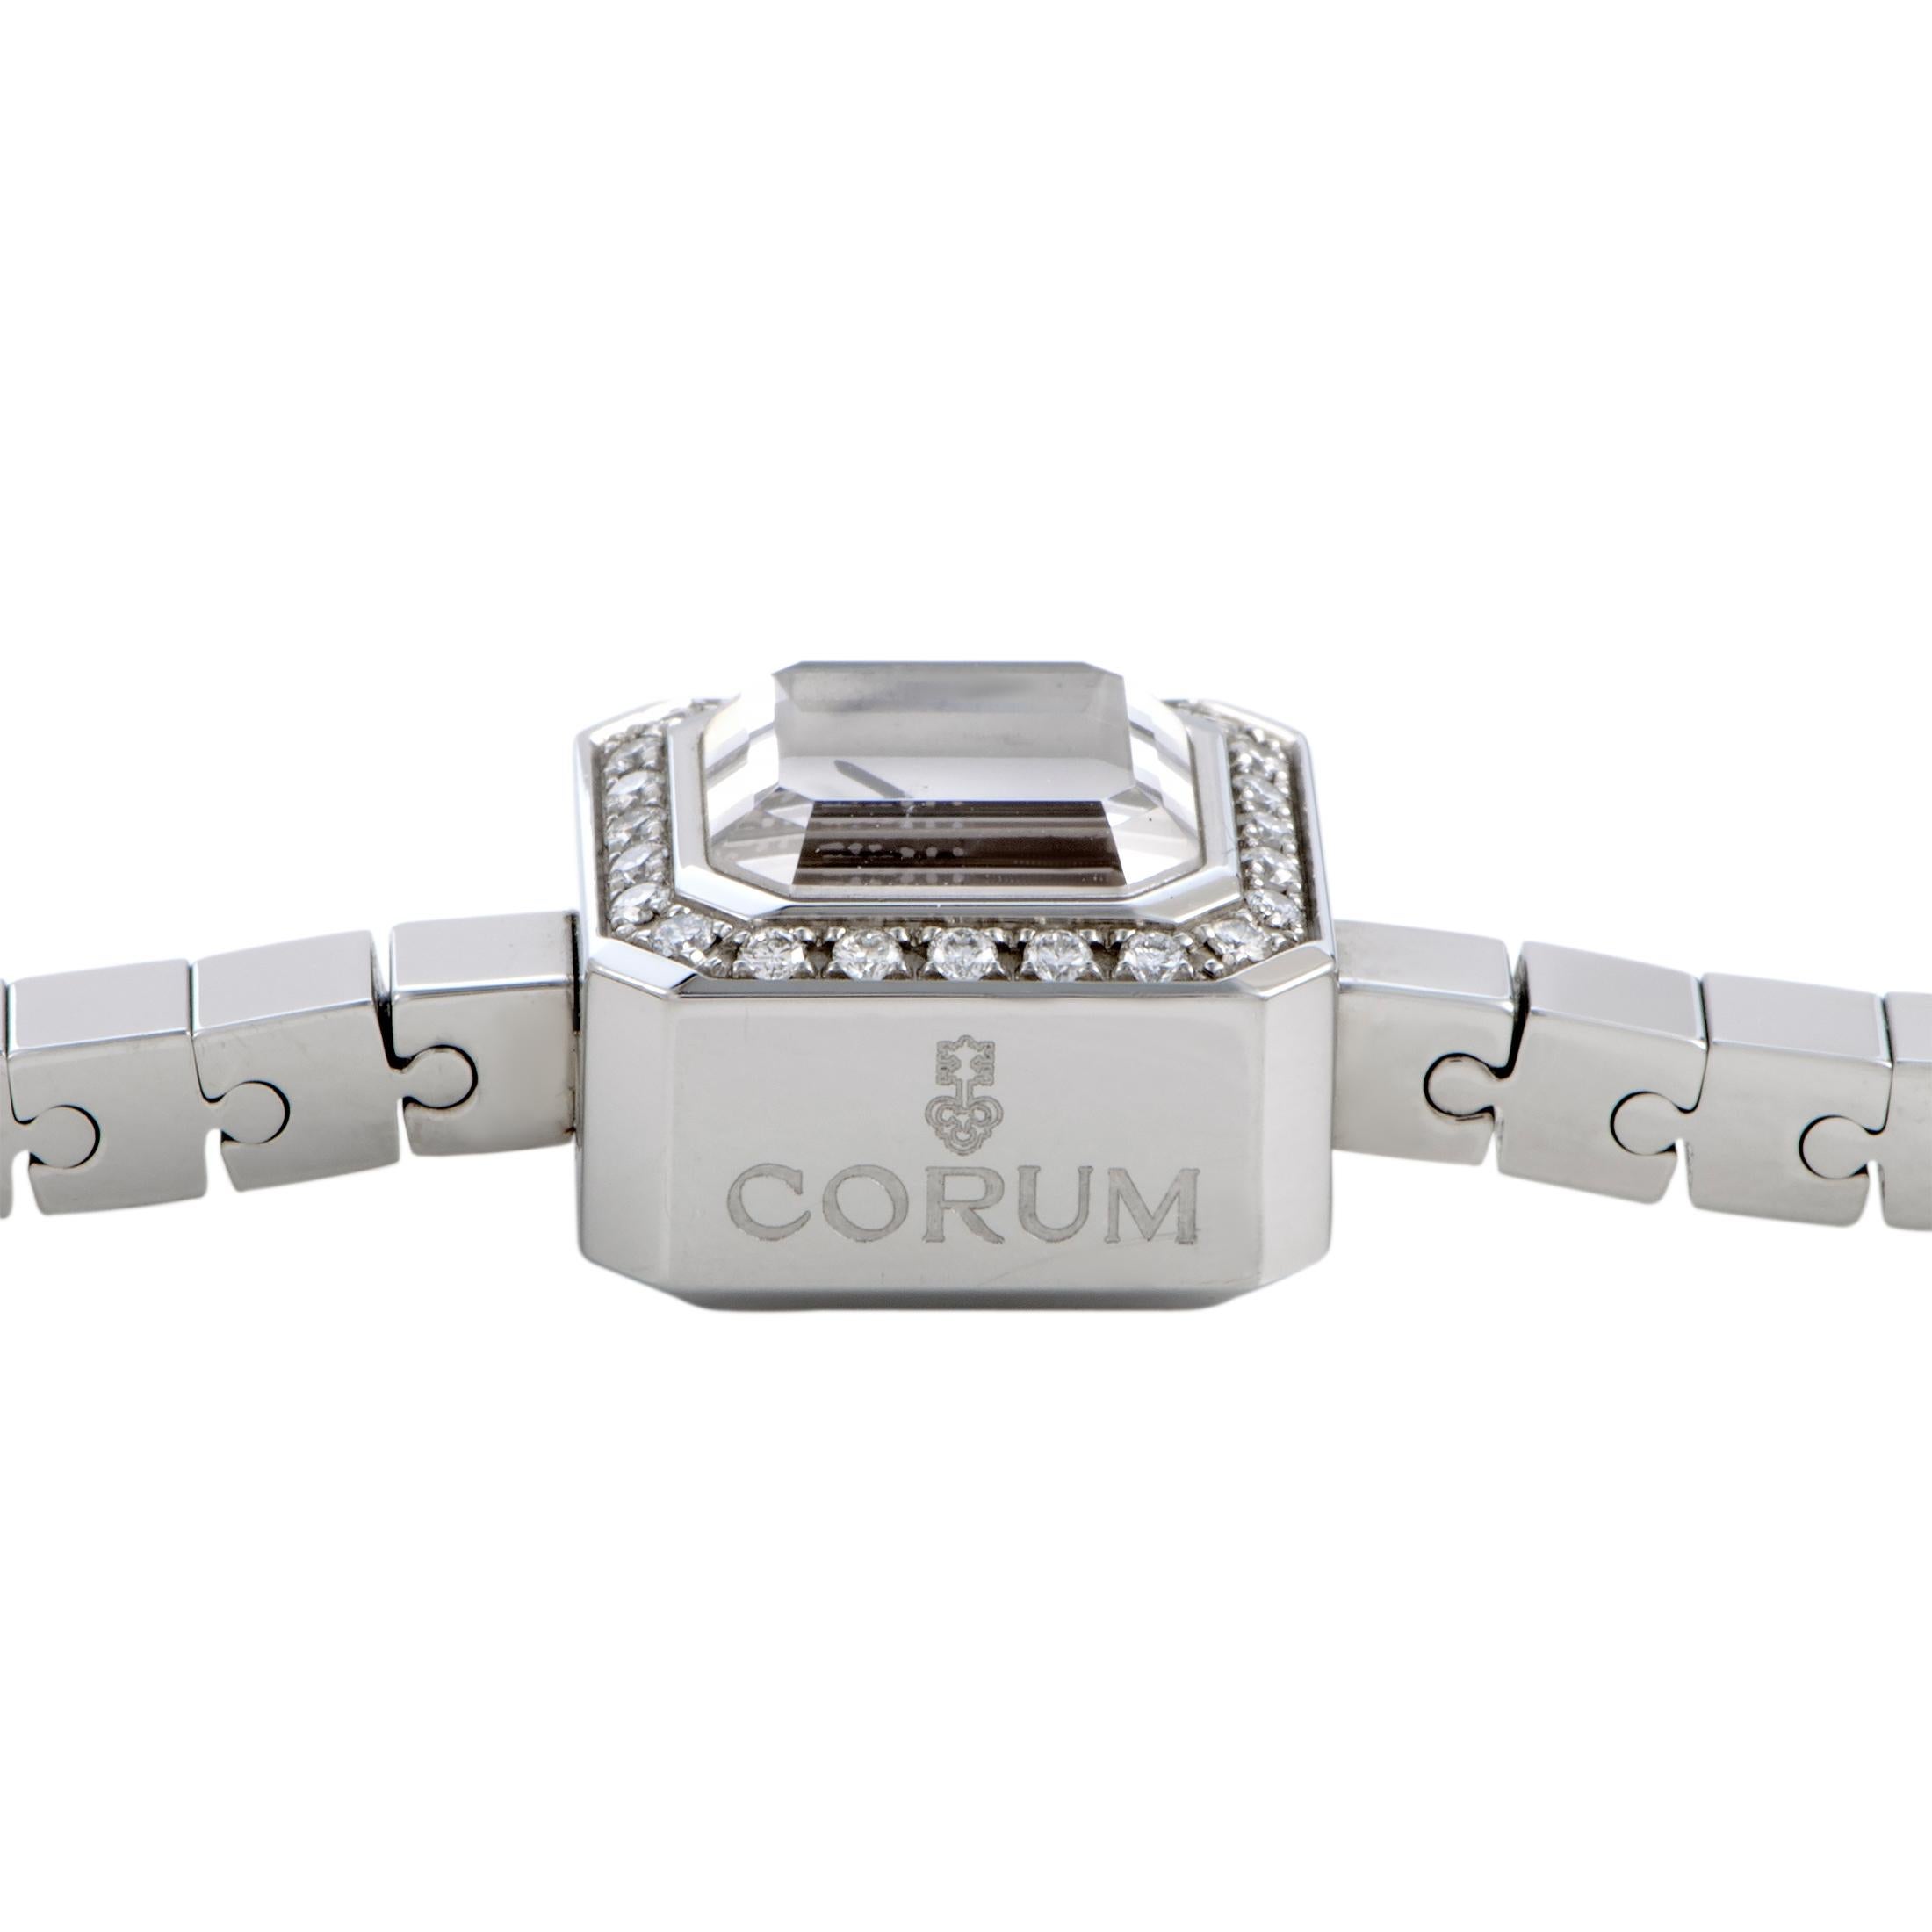 Utmost minimalism and fascinating subtlety are embodied in this brilliant timepiece from Corum that relies on exceptionally neat shapes and splendidly clear surfaces for a truly intriguing appearance while the sparkling diamonds provide a stylish